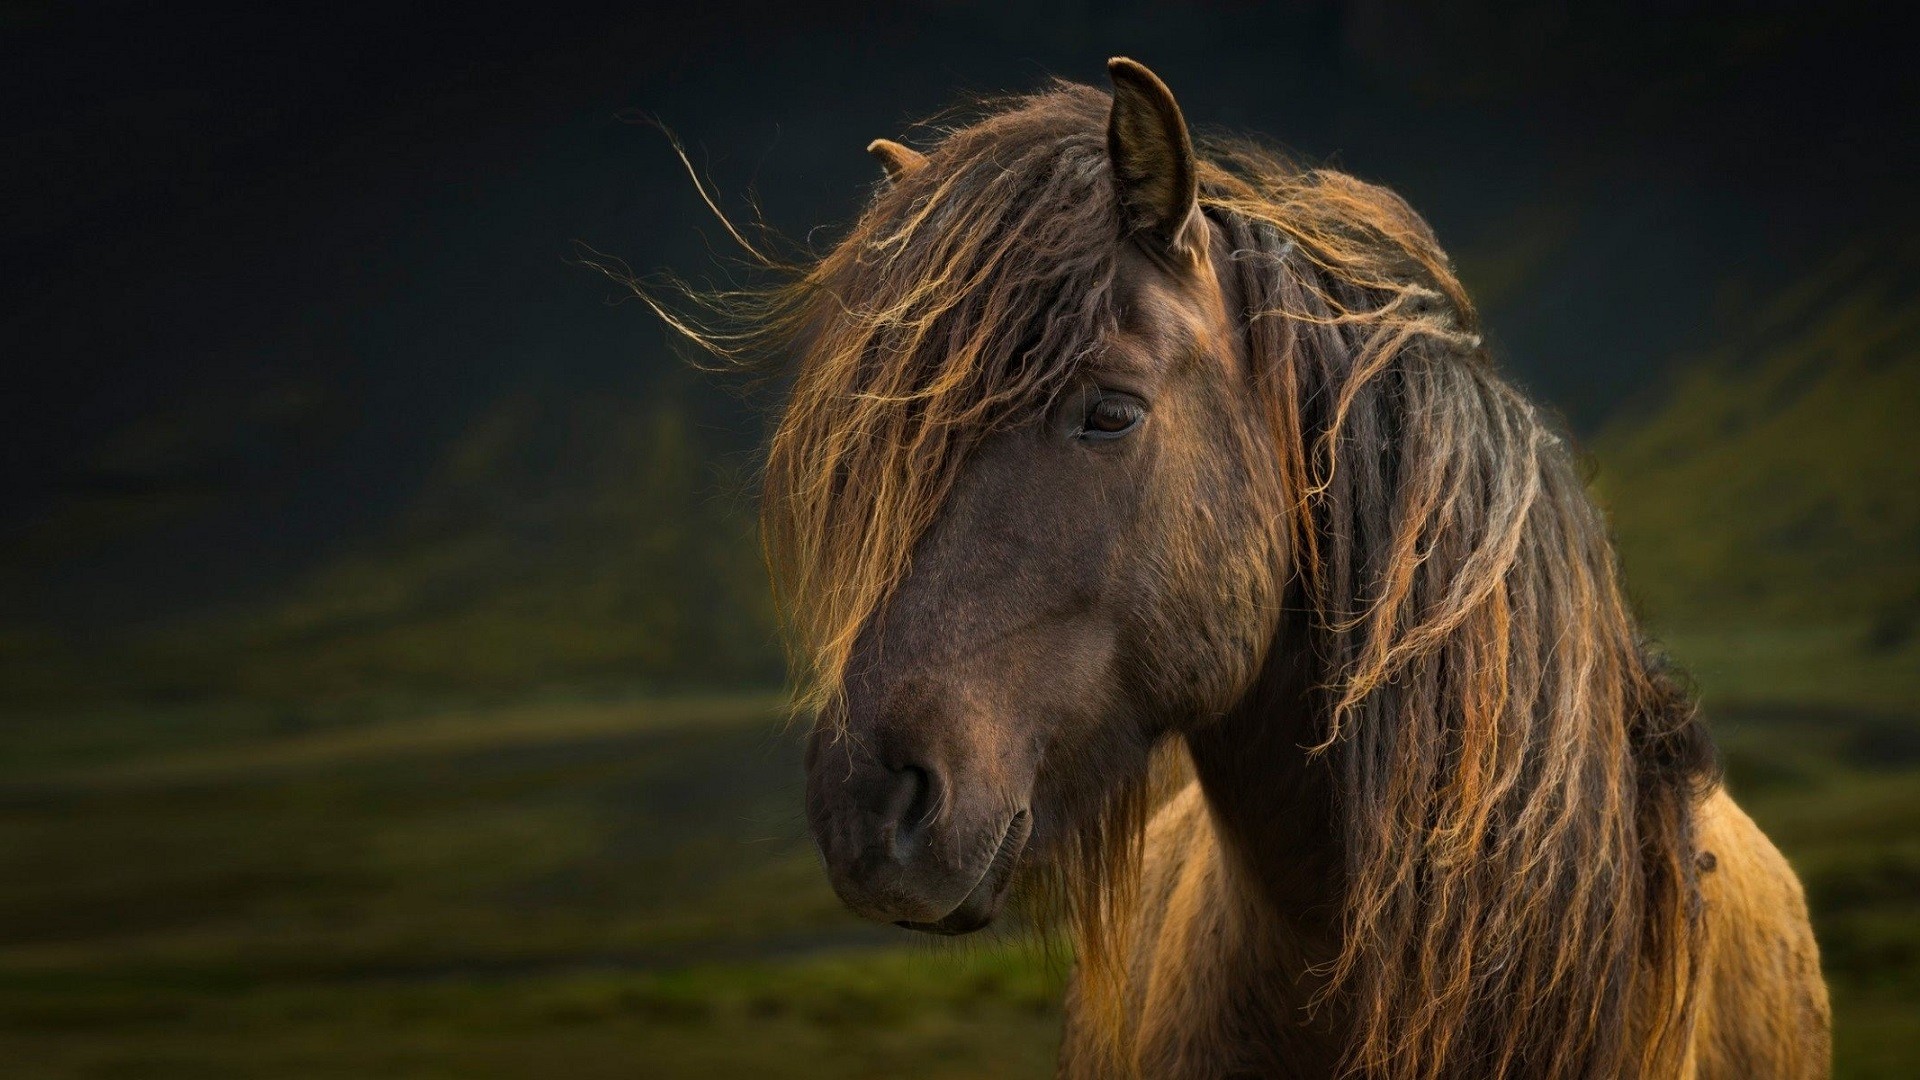 General 1920x1080 horse animals mammals outdoors hair in face